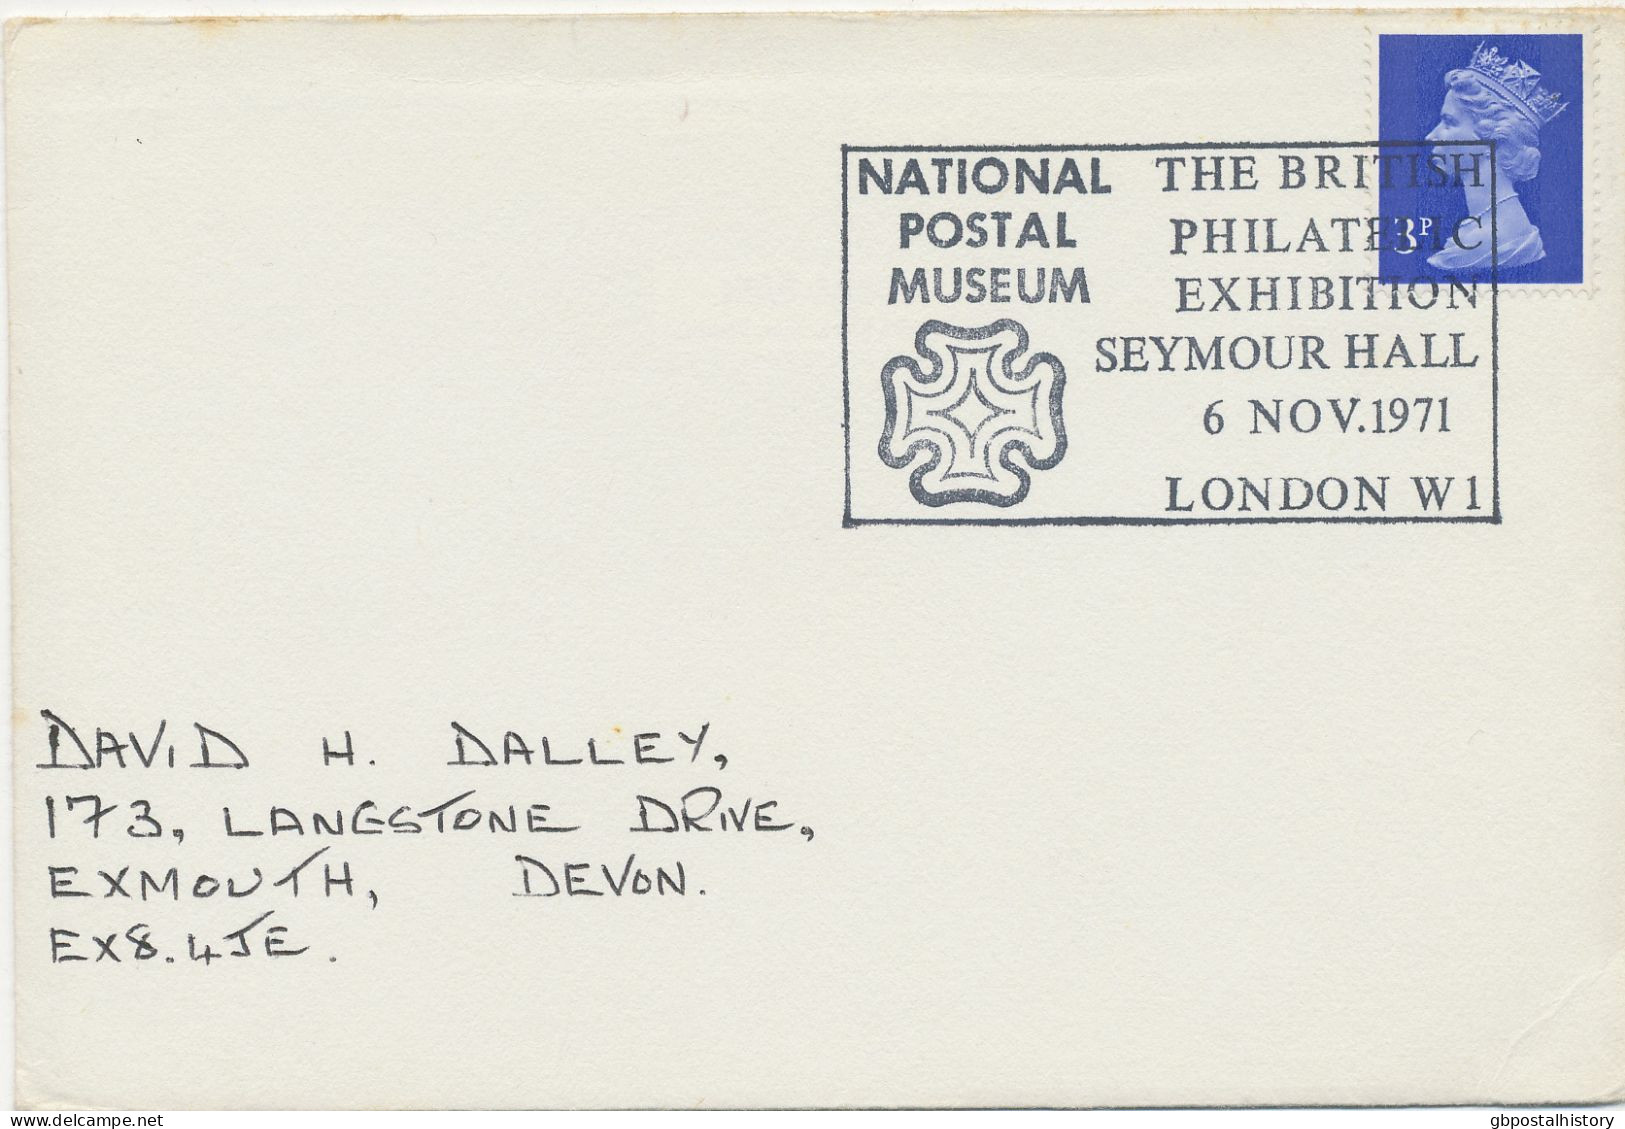 GB SPECIAL EVENT POSTMARKS 1971 THE BRITISH PHILATELIC EXHIBITION SEYMOUR HALL LONDON W.I. - NATIONAL POSTAL MUSEUM - Lettres & Documents